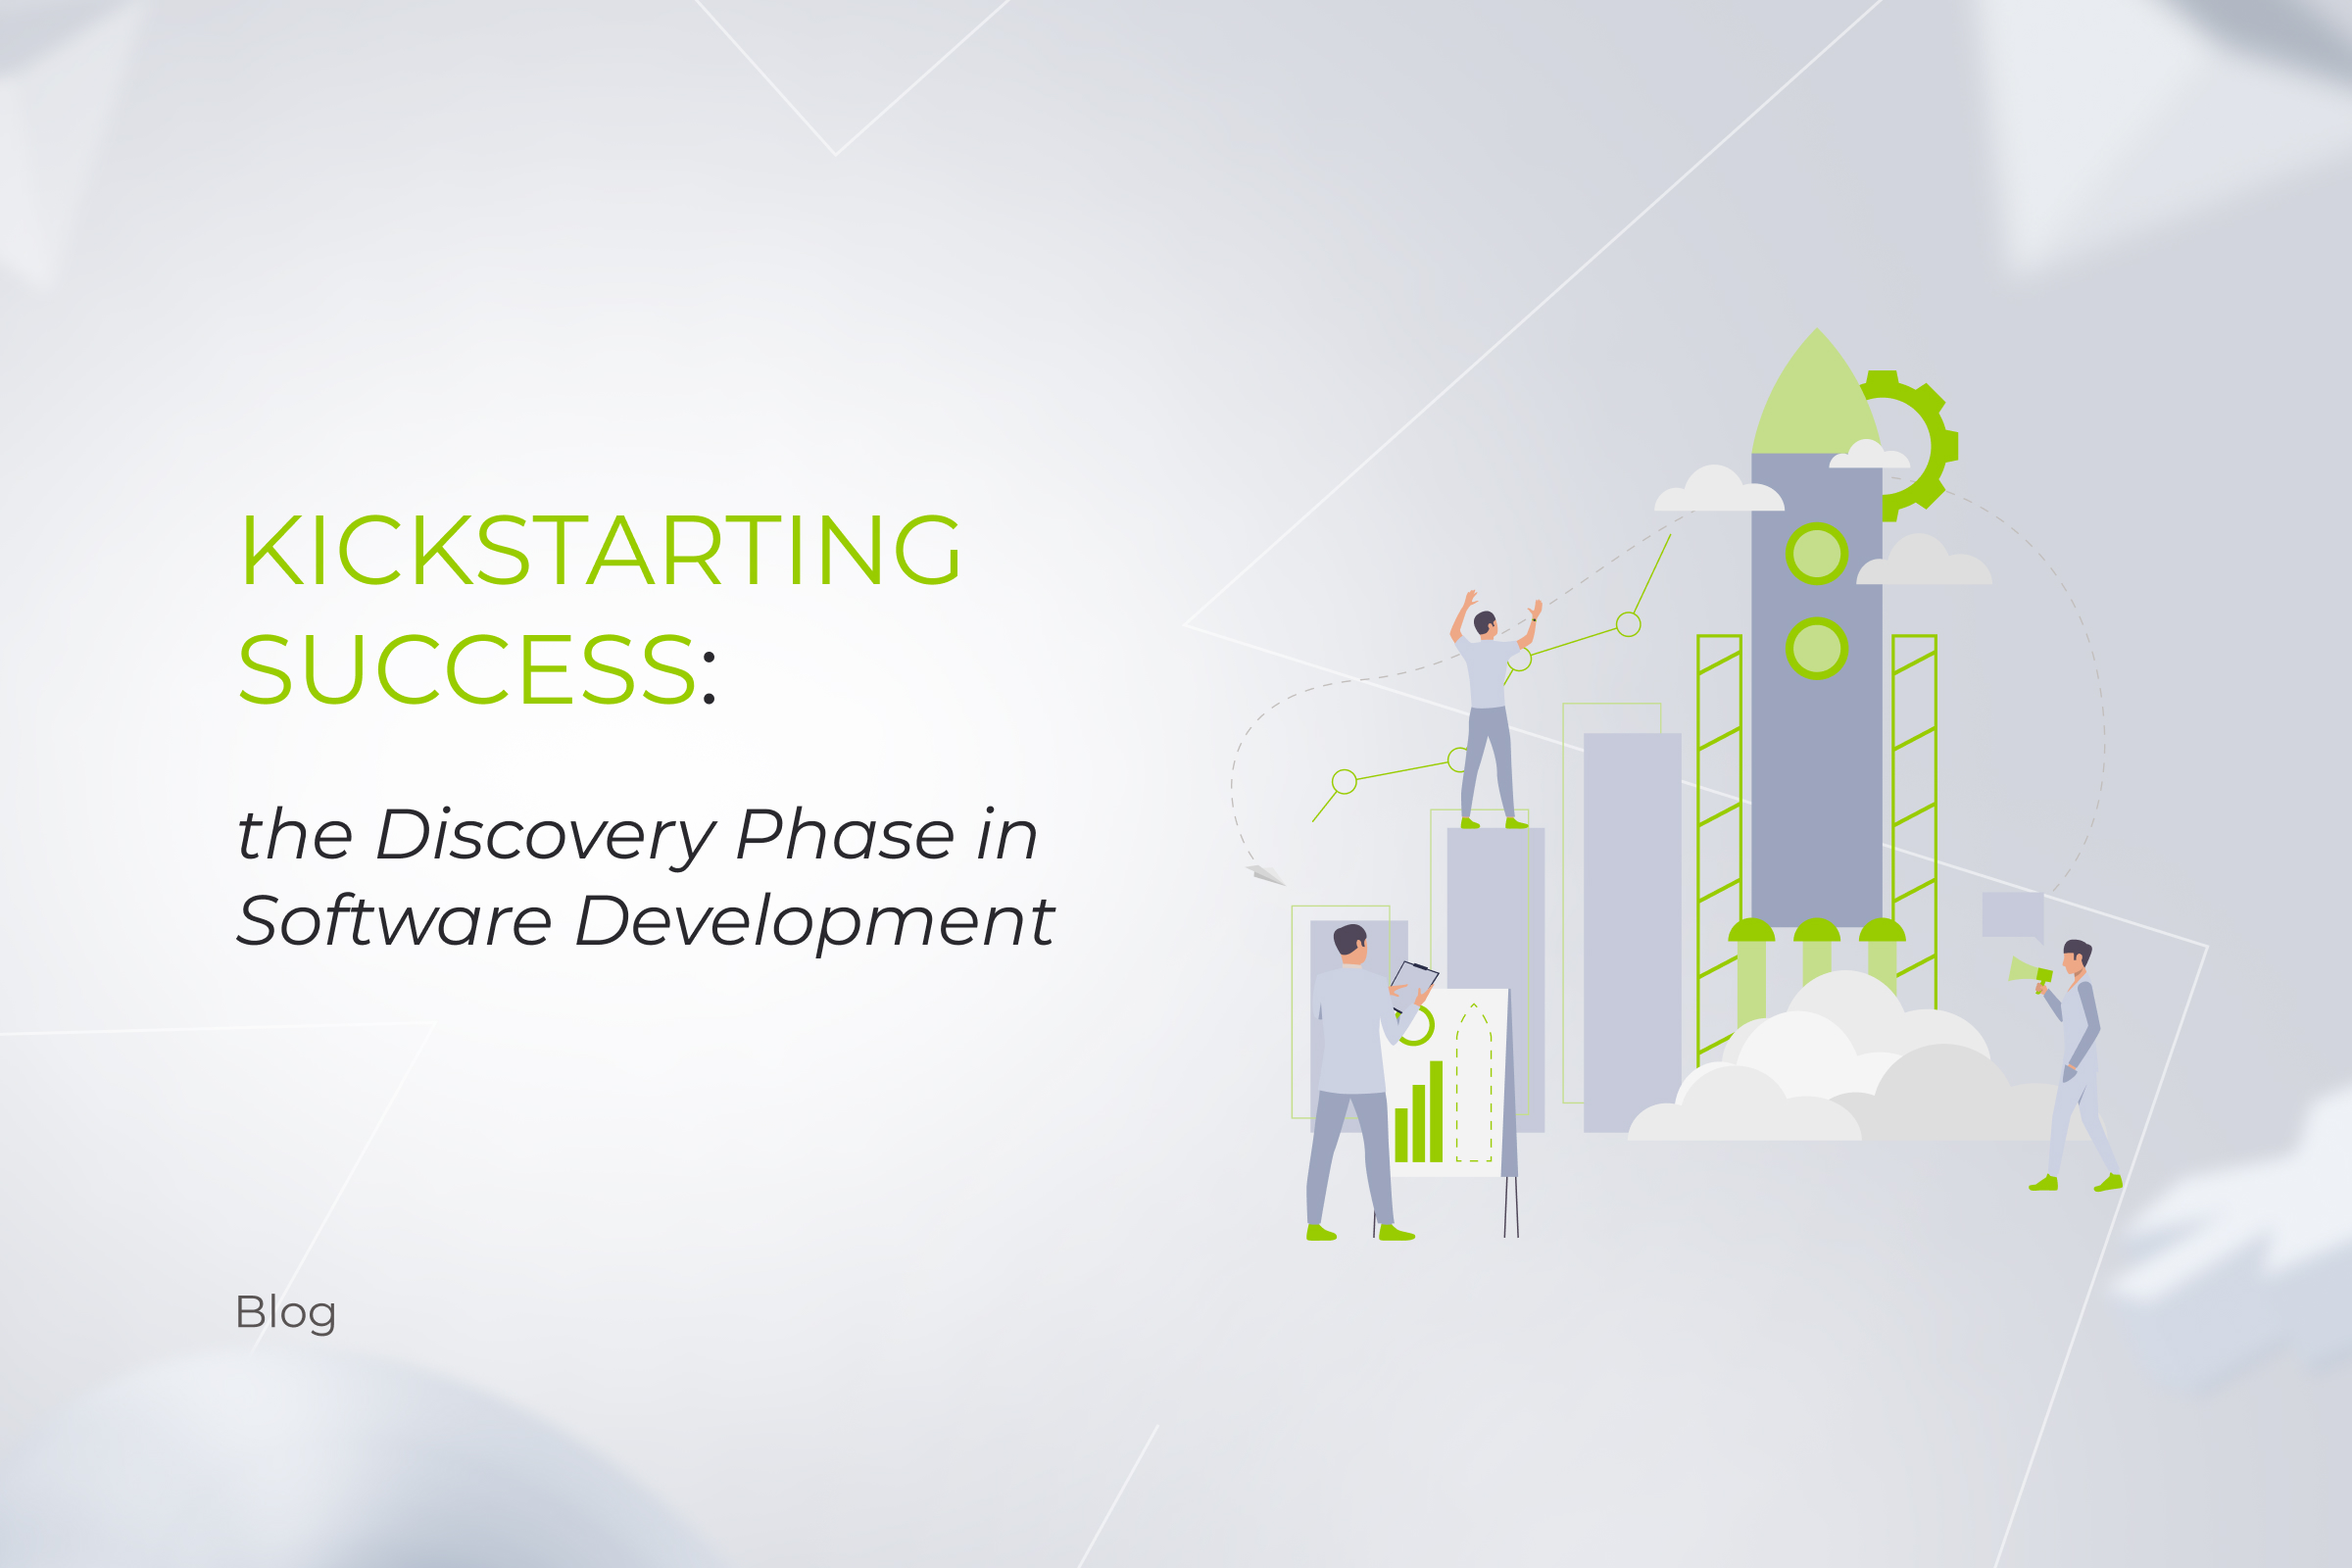 Kickstarting Success: the Discovery Phase in Software Development